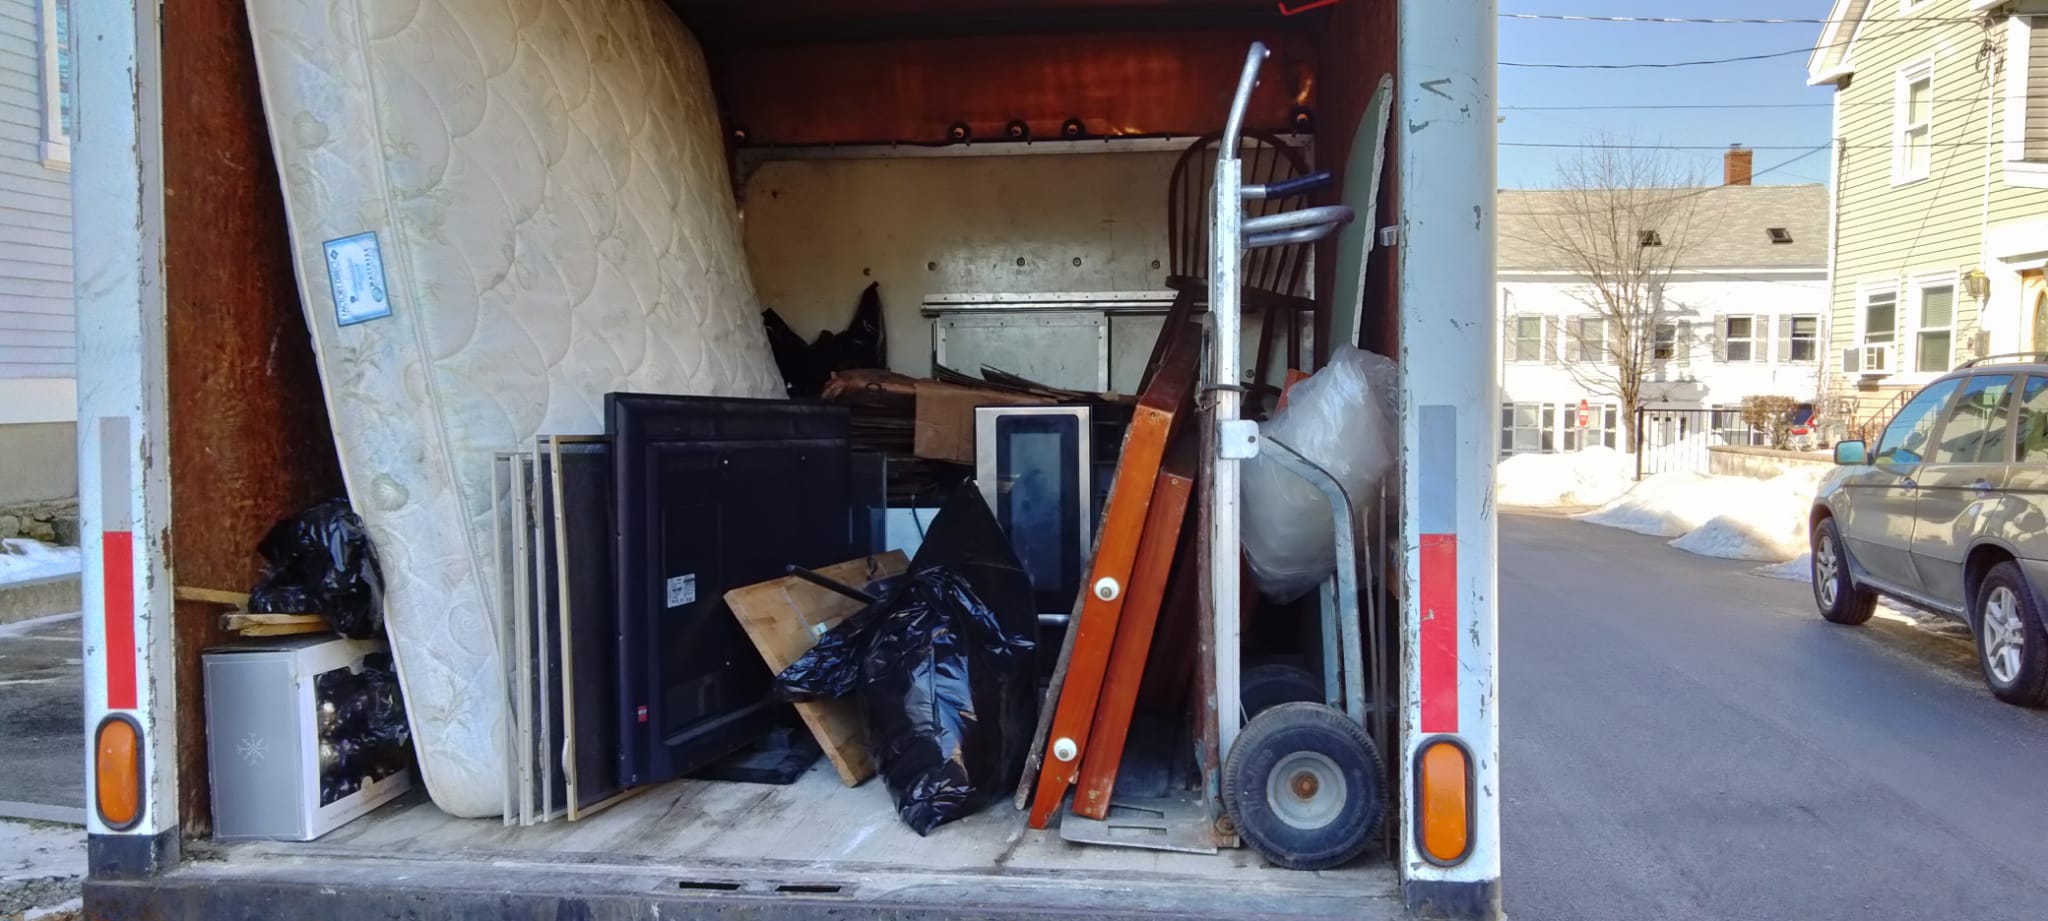 Box truck with old junk from an house in it, including a TV, a microwave, and a mattress